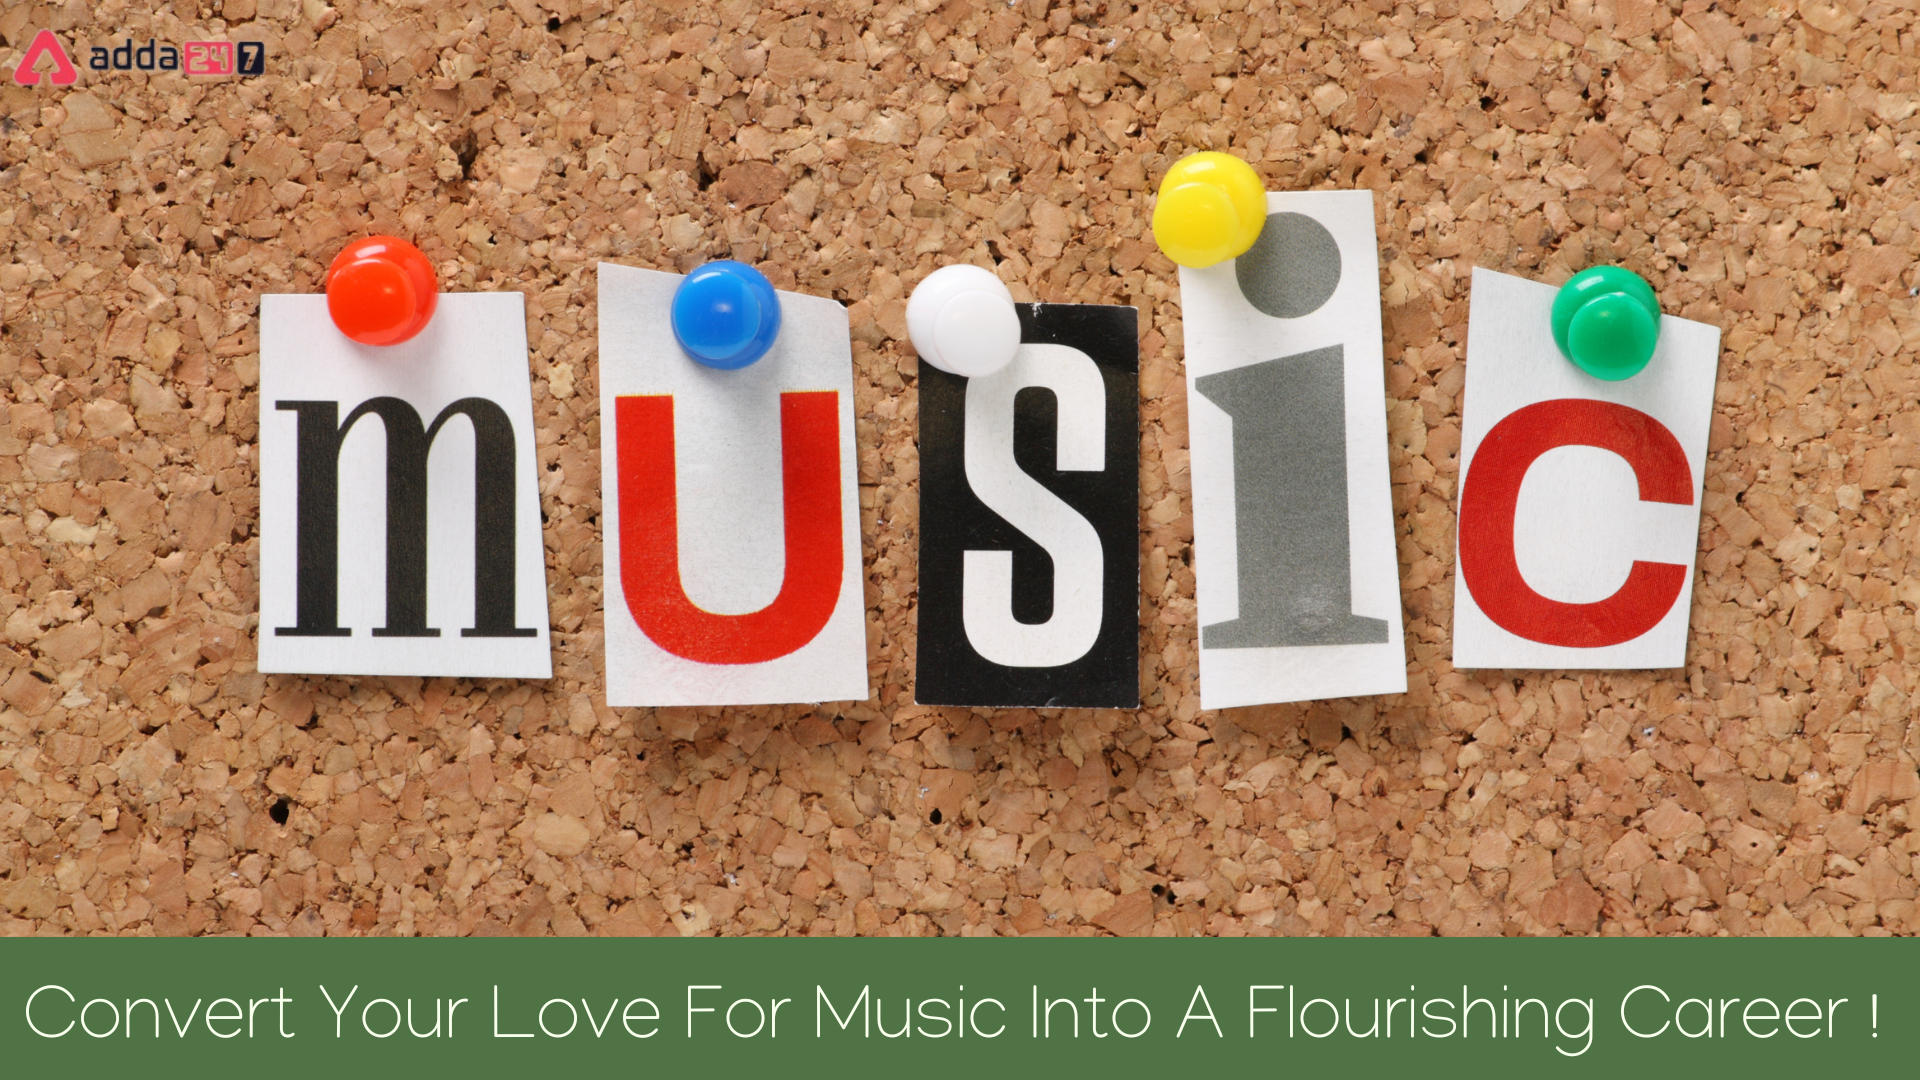 Convert your love for MUSIC into a flourishing career